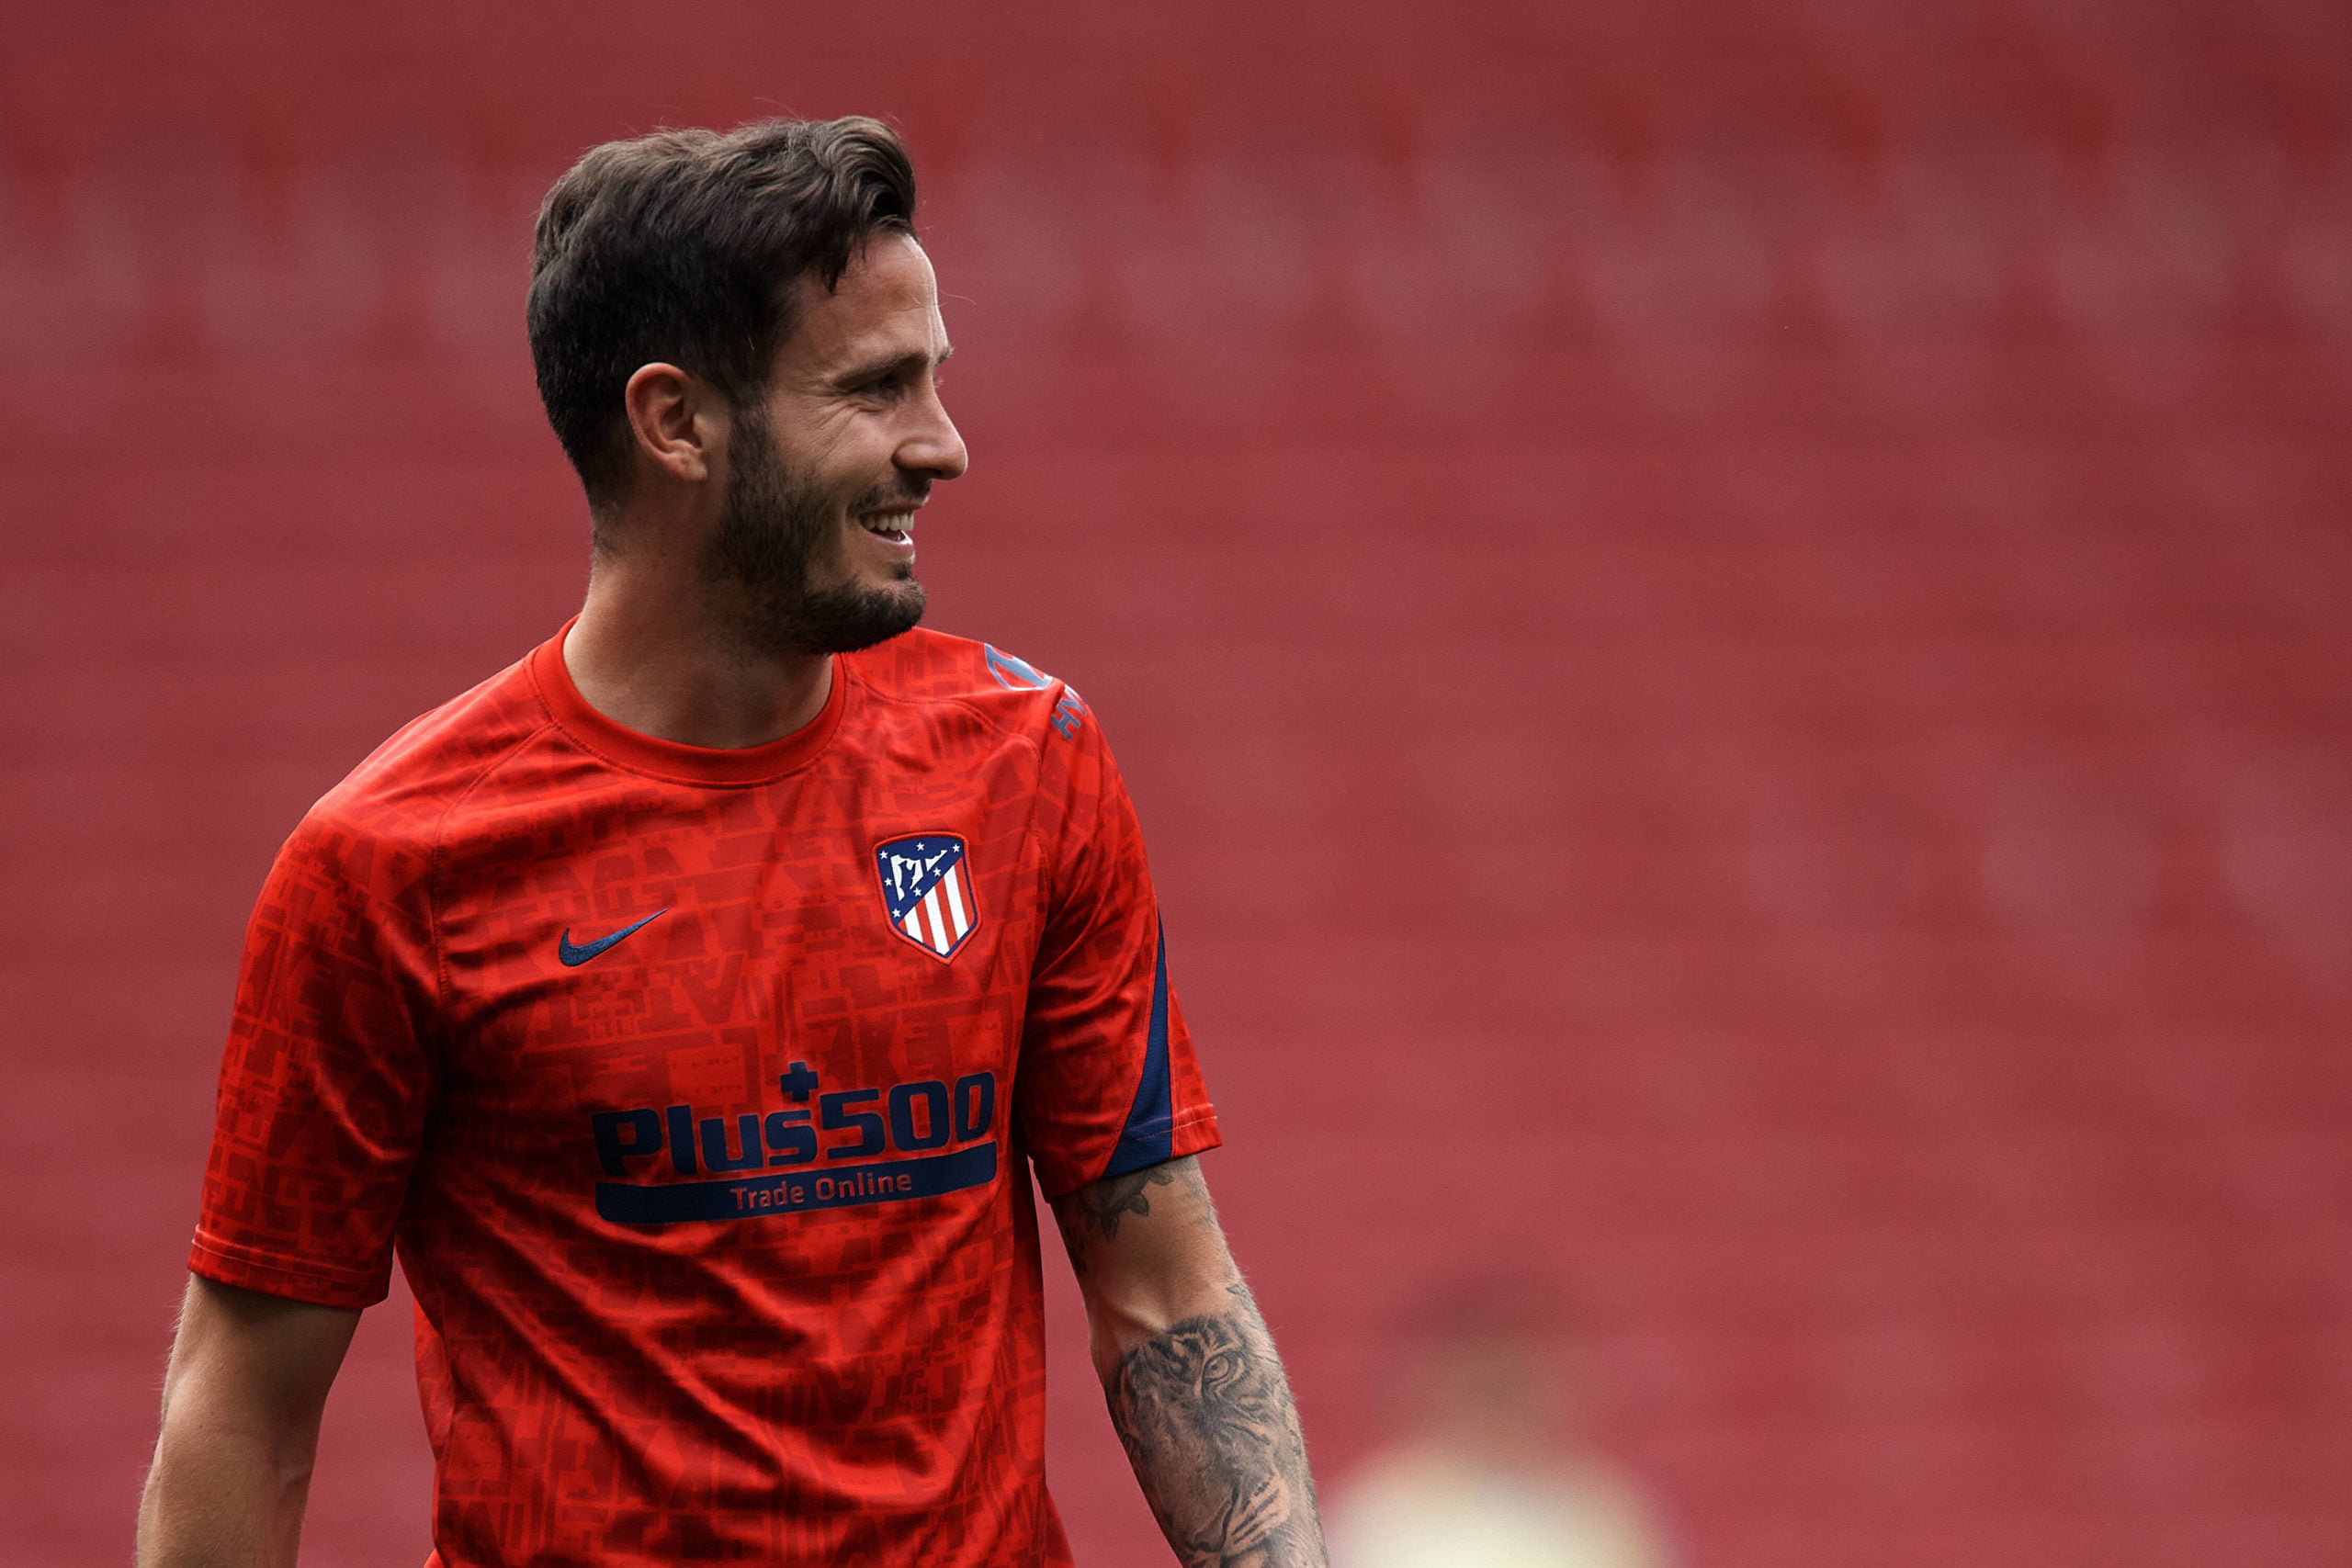 Chelsea eager to seal a loan move for Saul Niguez who is seen in the picture